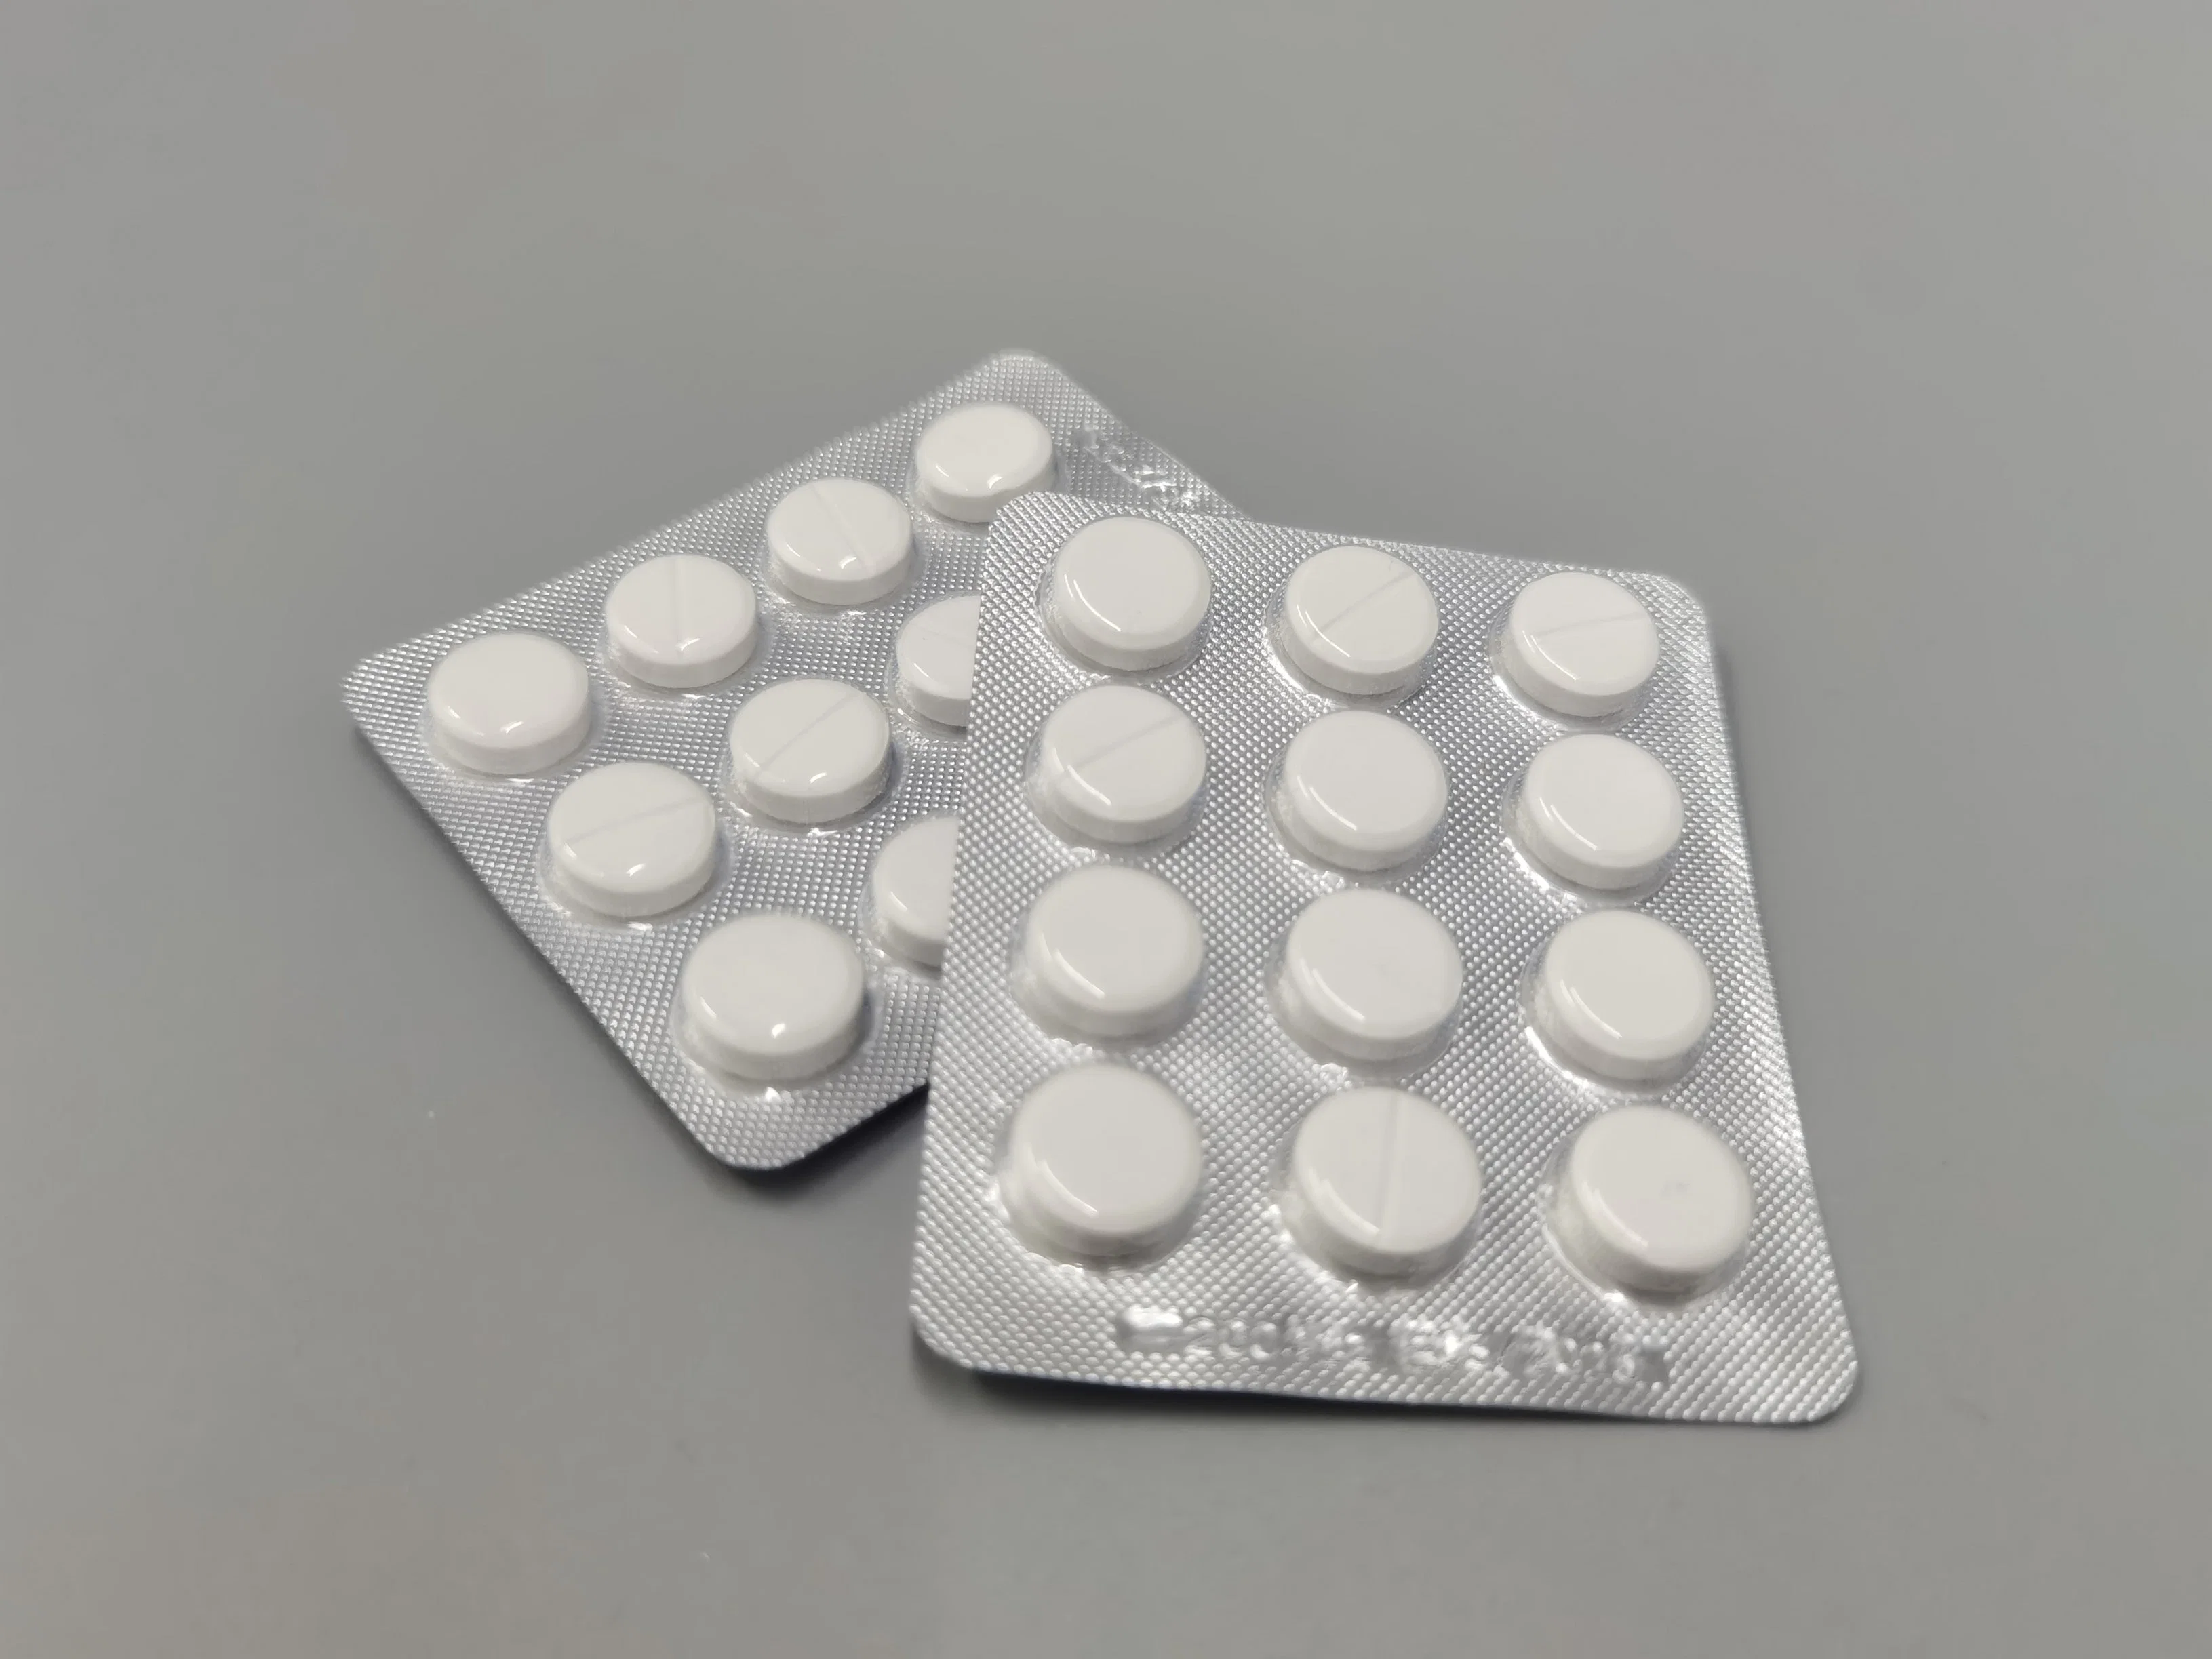 Metronidazole Tablet 200mg 250mg 500mg Pharmaceutical Product